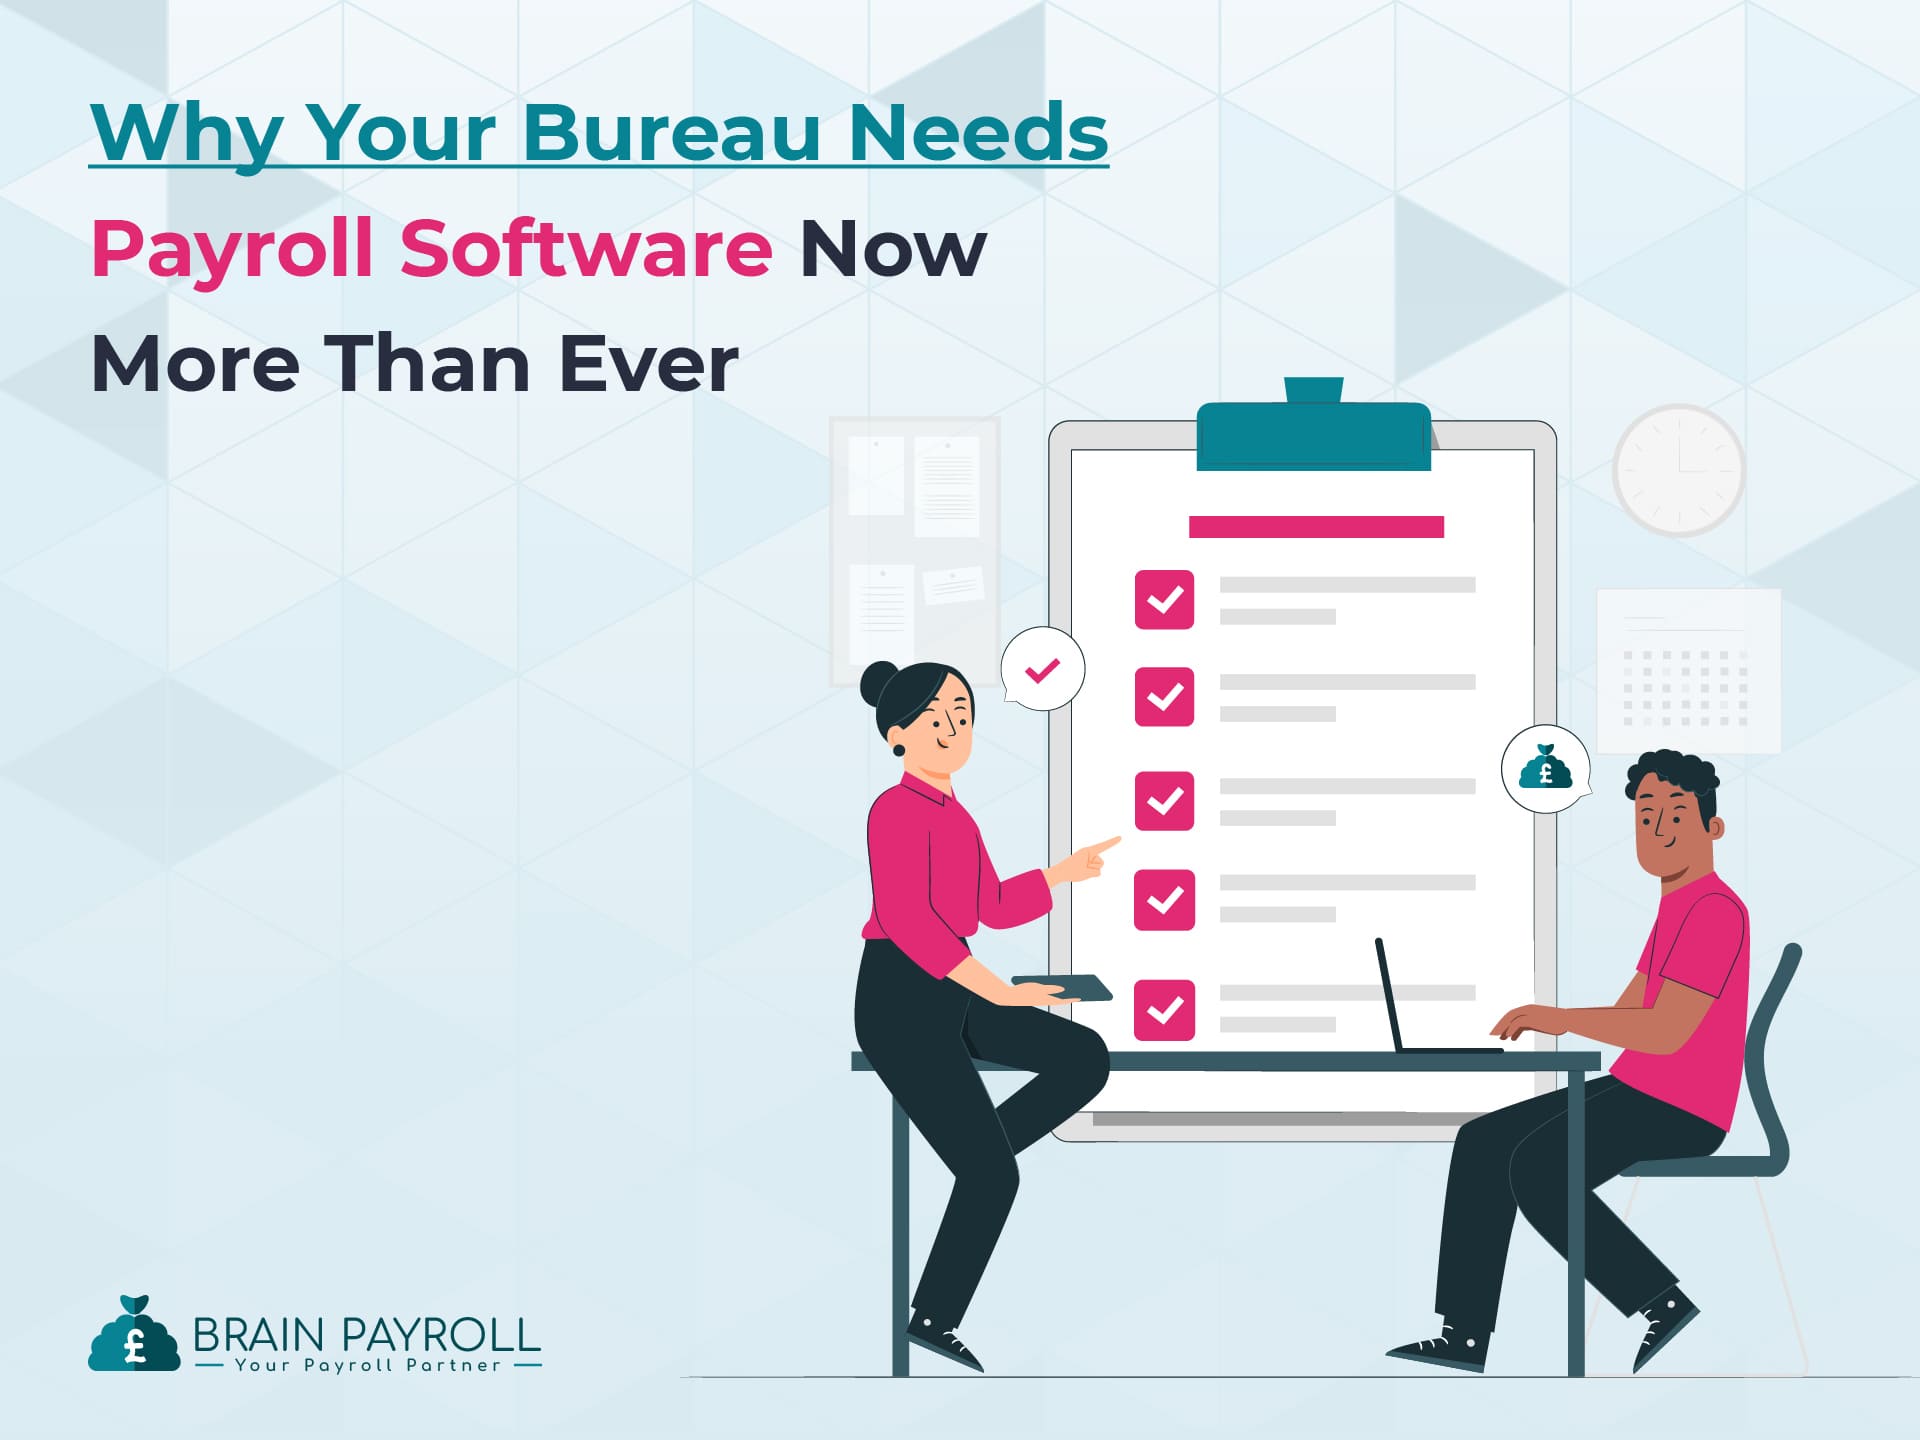 Why Your Bureau Needs Payroll Software Now More Than Ever